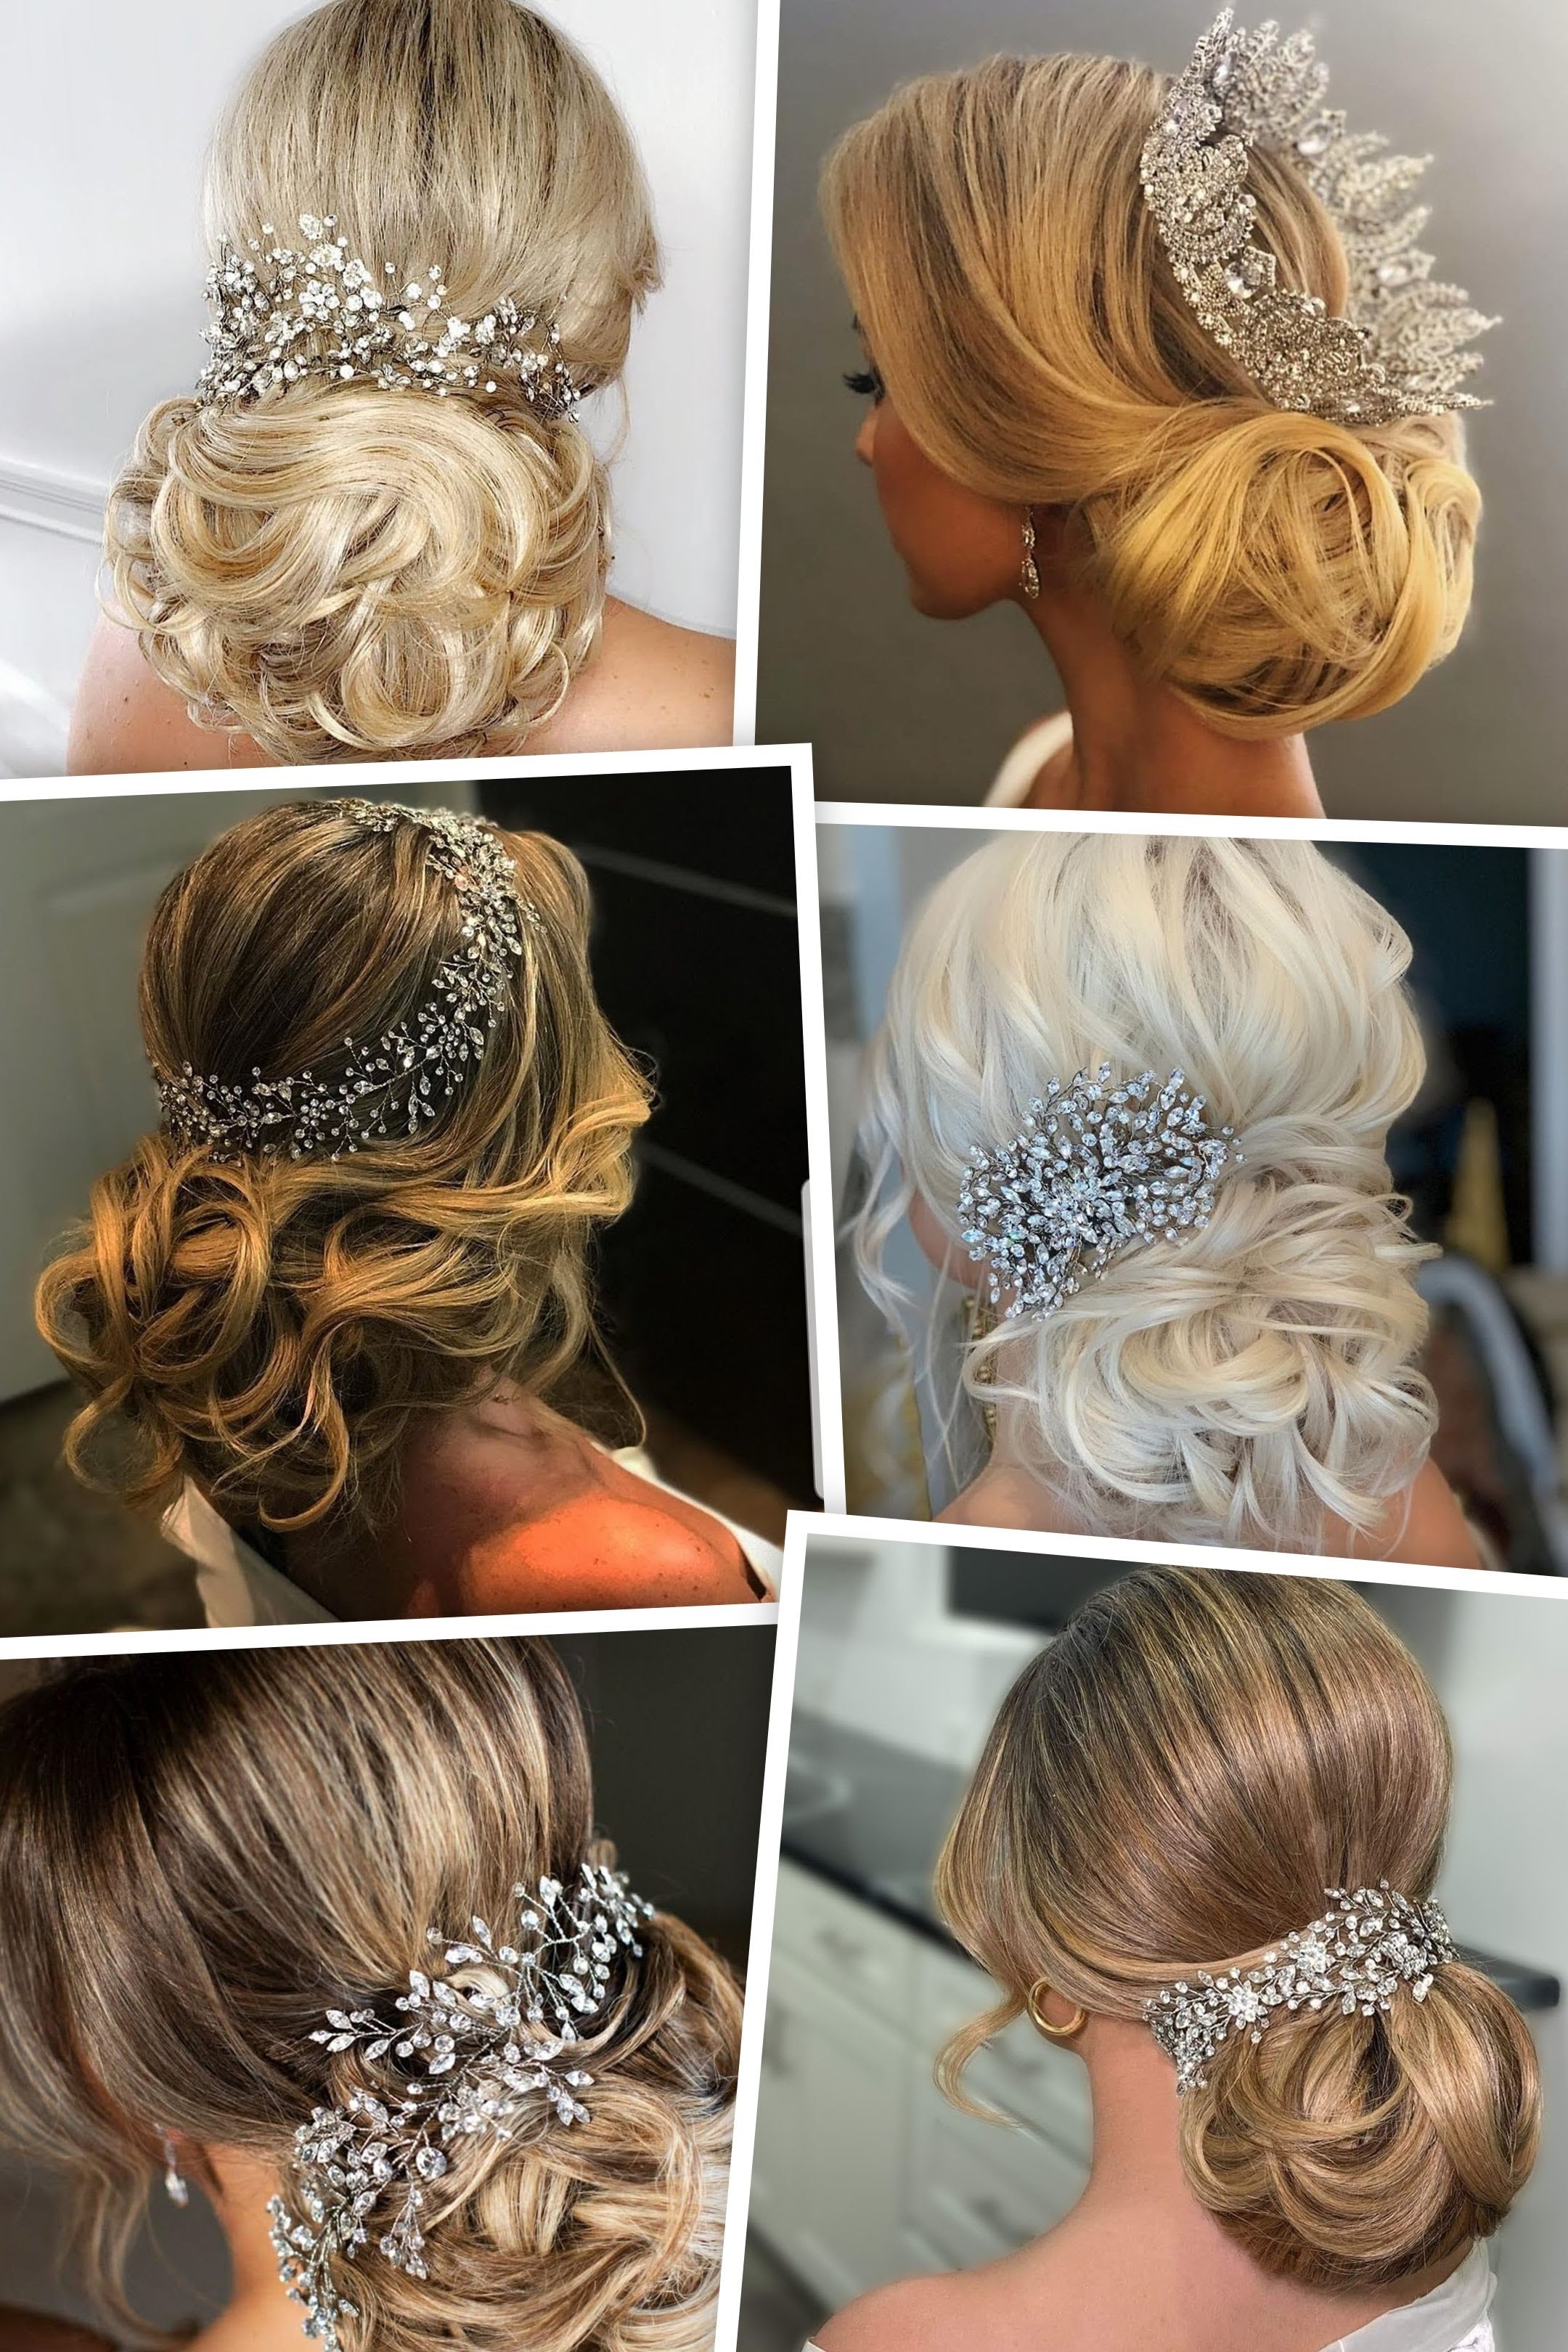 6 bold crystal bridal bridal hair accessories accenting the back of different low bun wedding day hair styles.